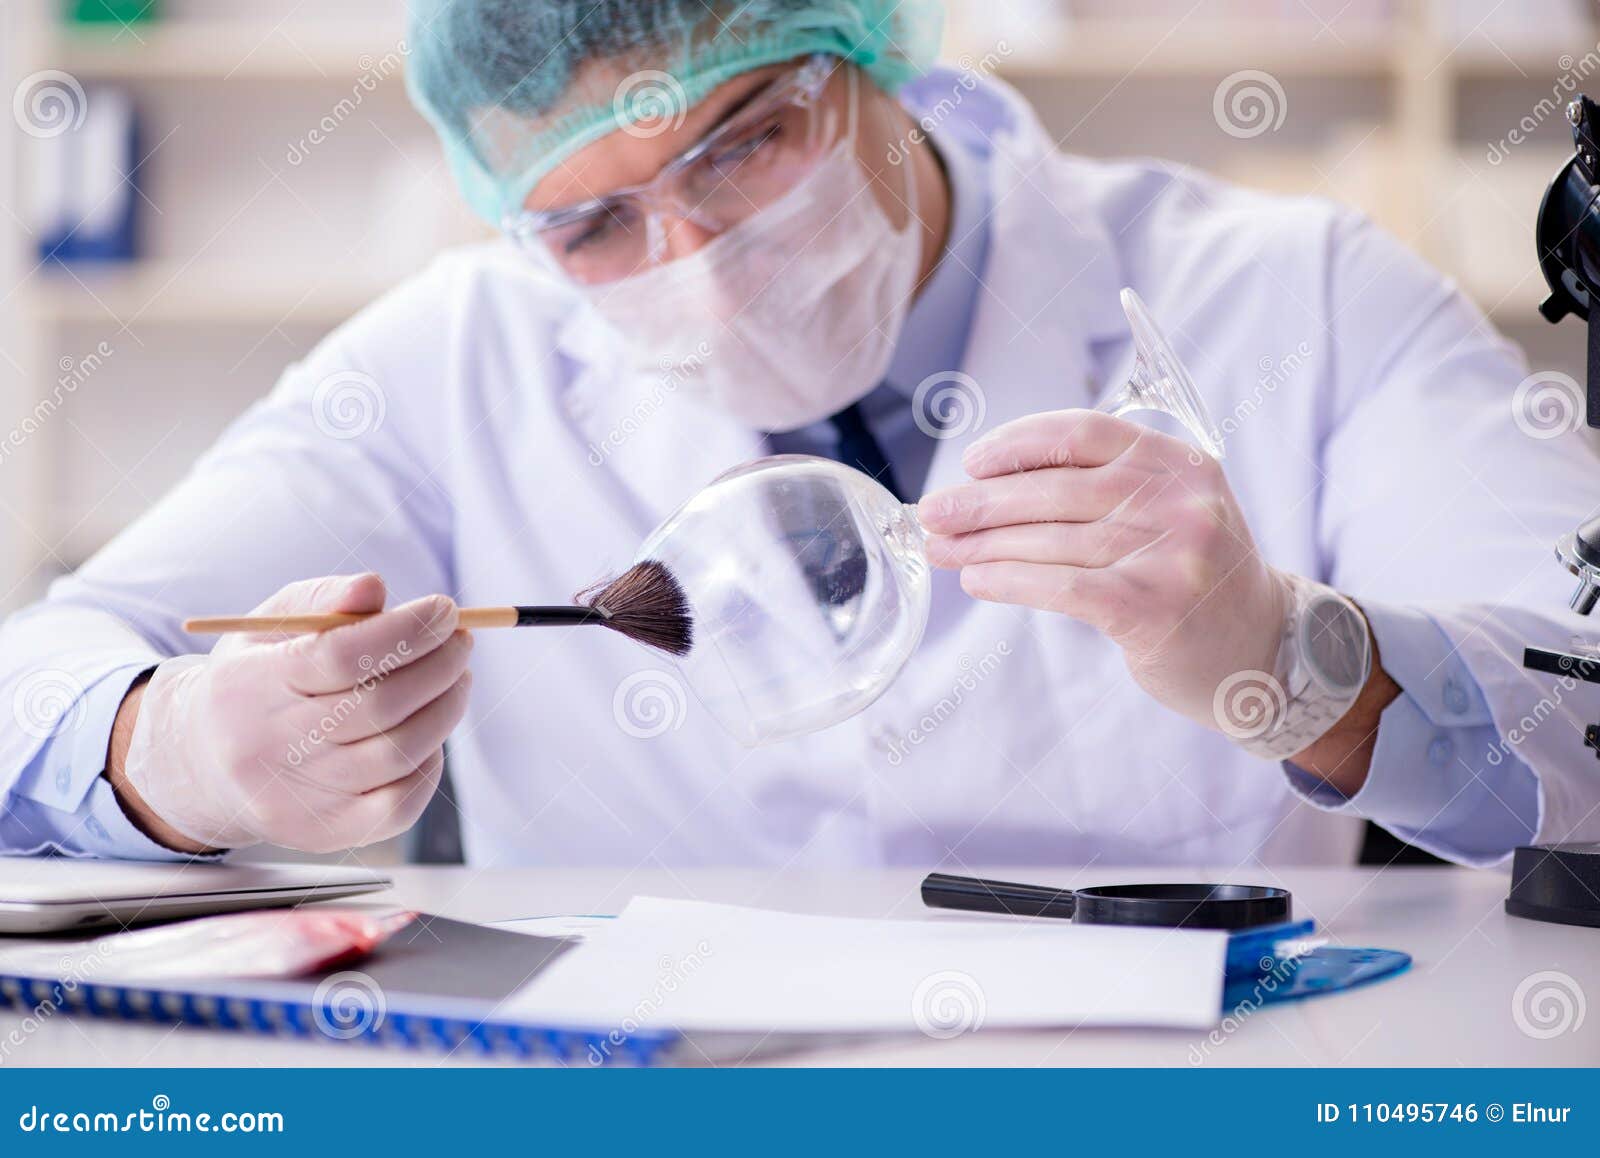 the forensics investigator working in lab on crime evidence